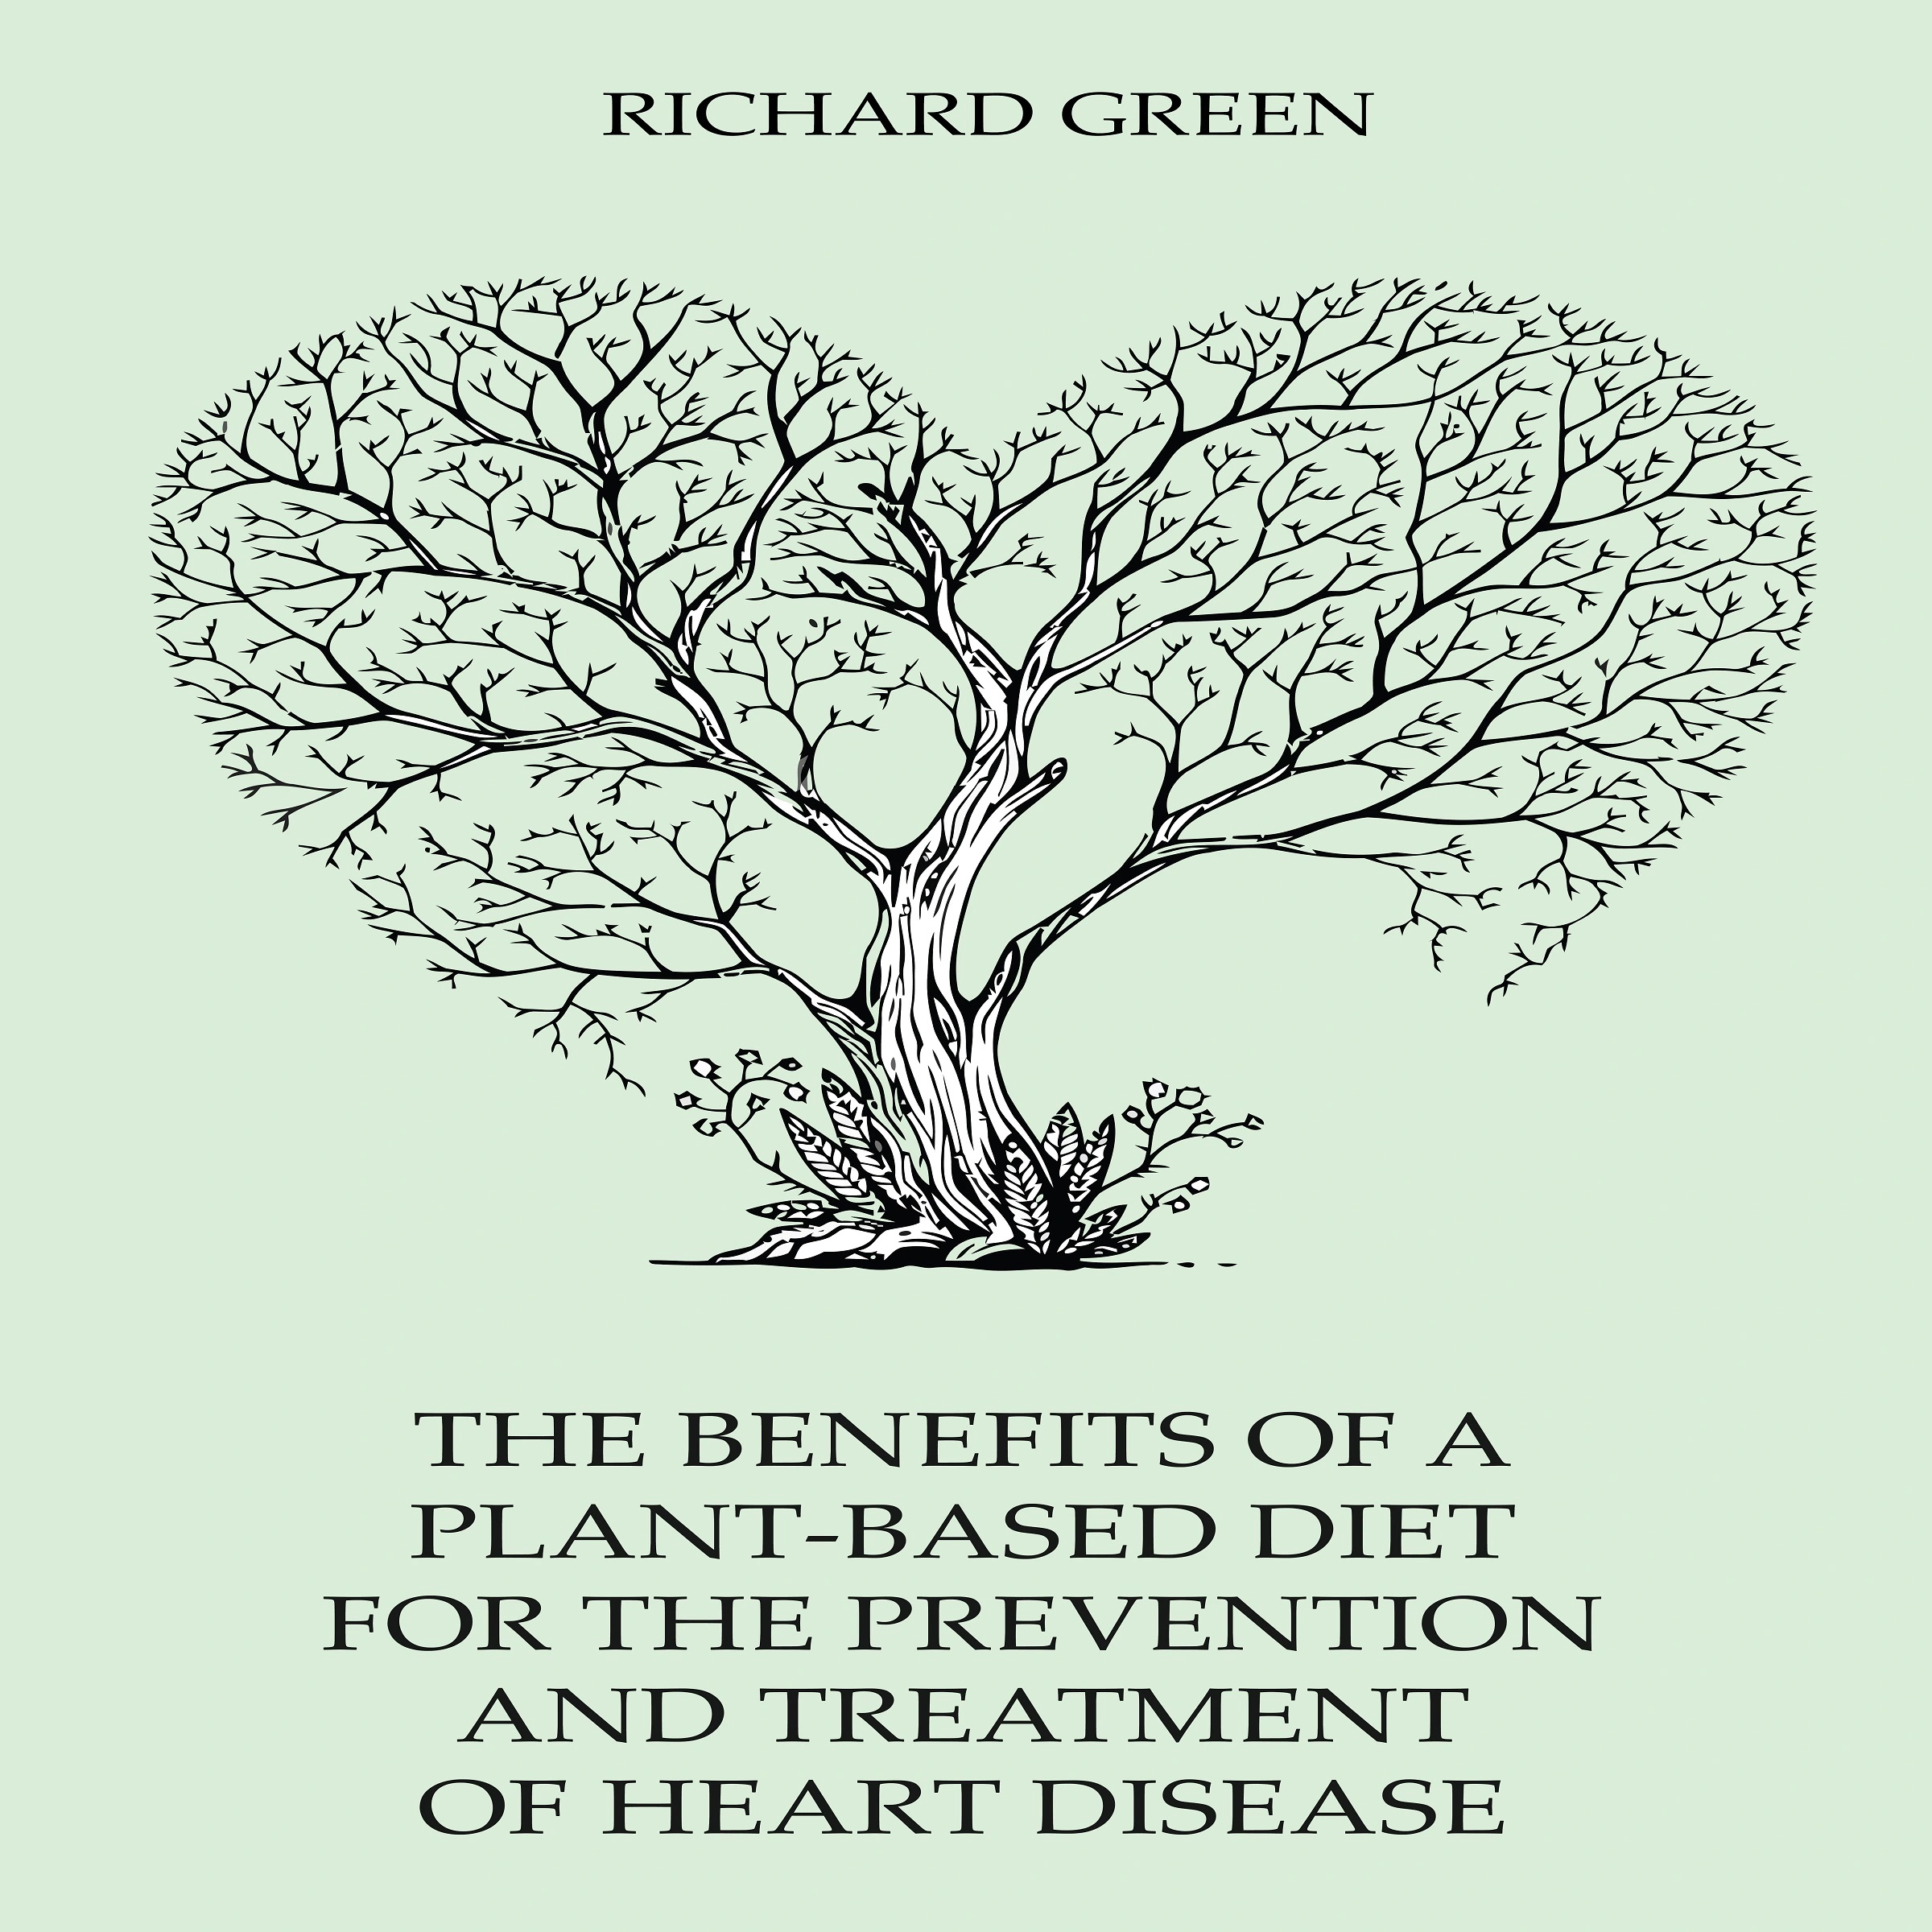 The Benefits Of A Plant-Based Diet For The Prevention And Treatment Of Heart Disease by Richard Green Audiobook